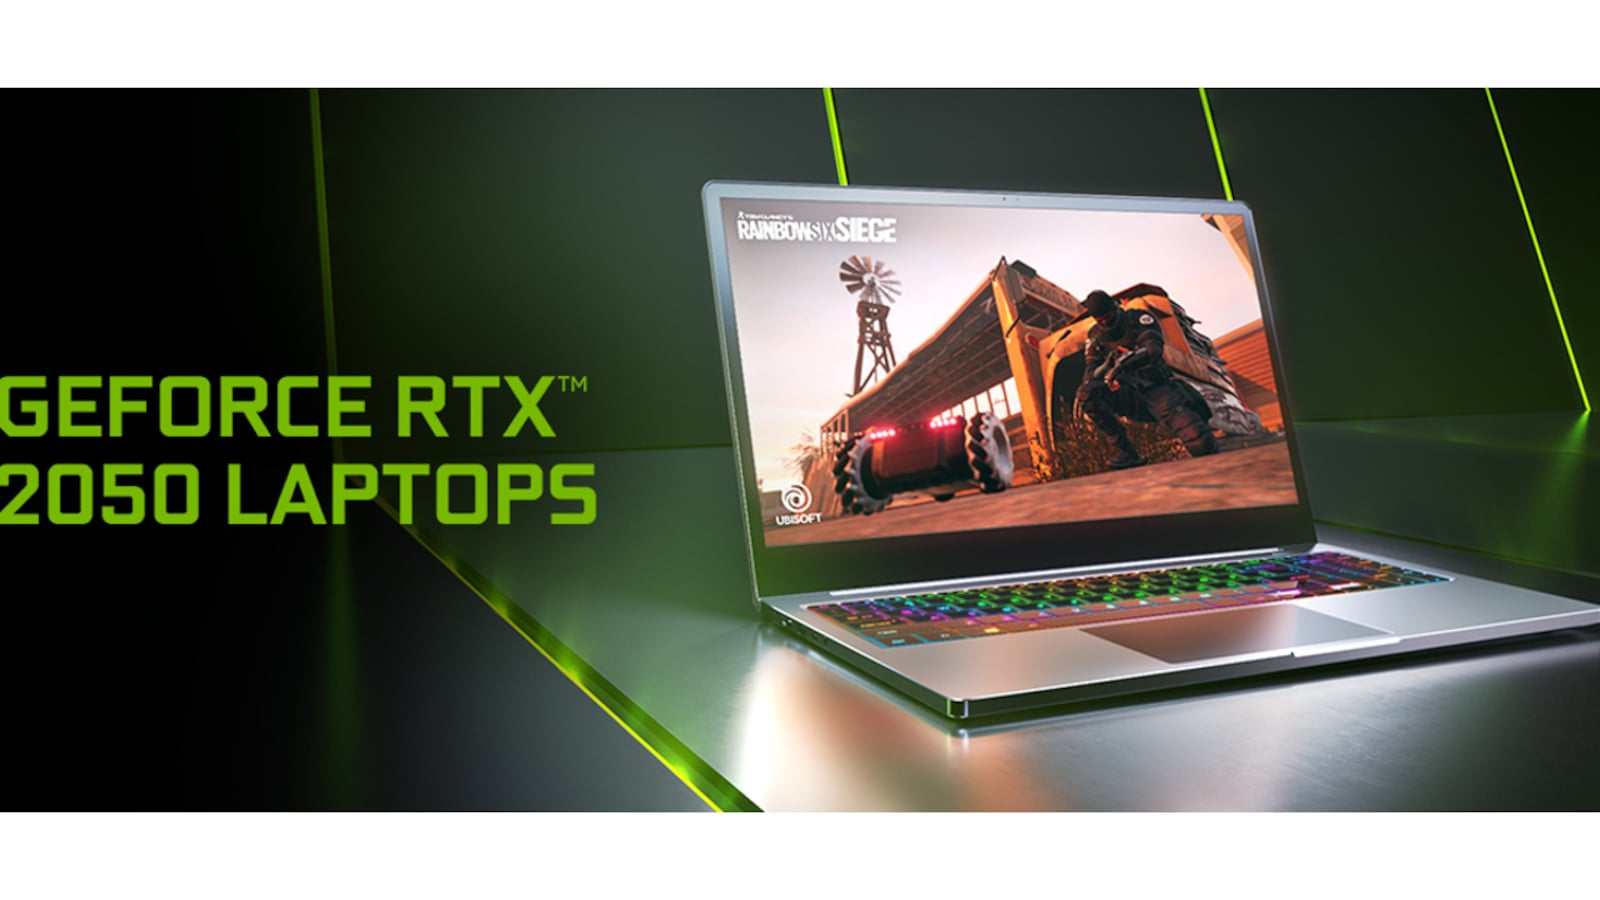 Profet indsats Indica Nvidia announces GeForce RTX 2050 laptop GPU for affordable gaming notebooks